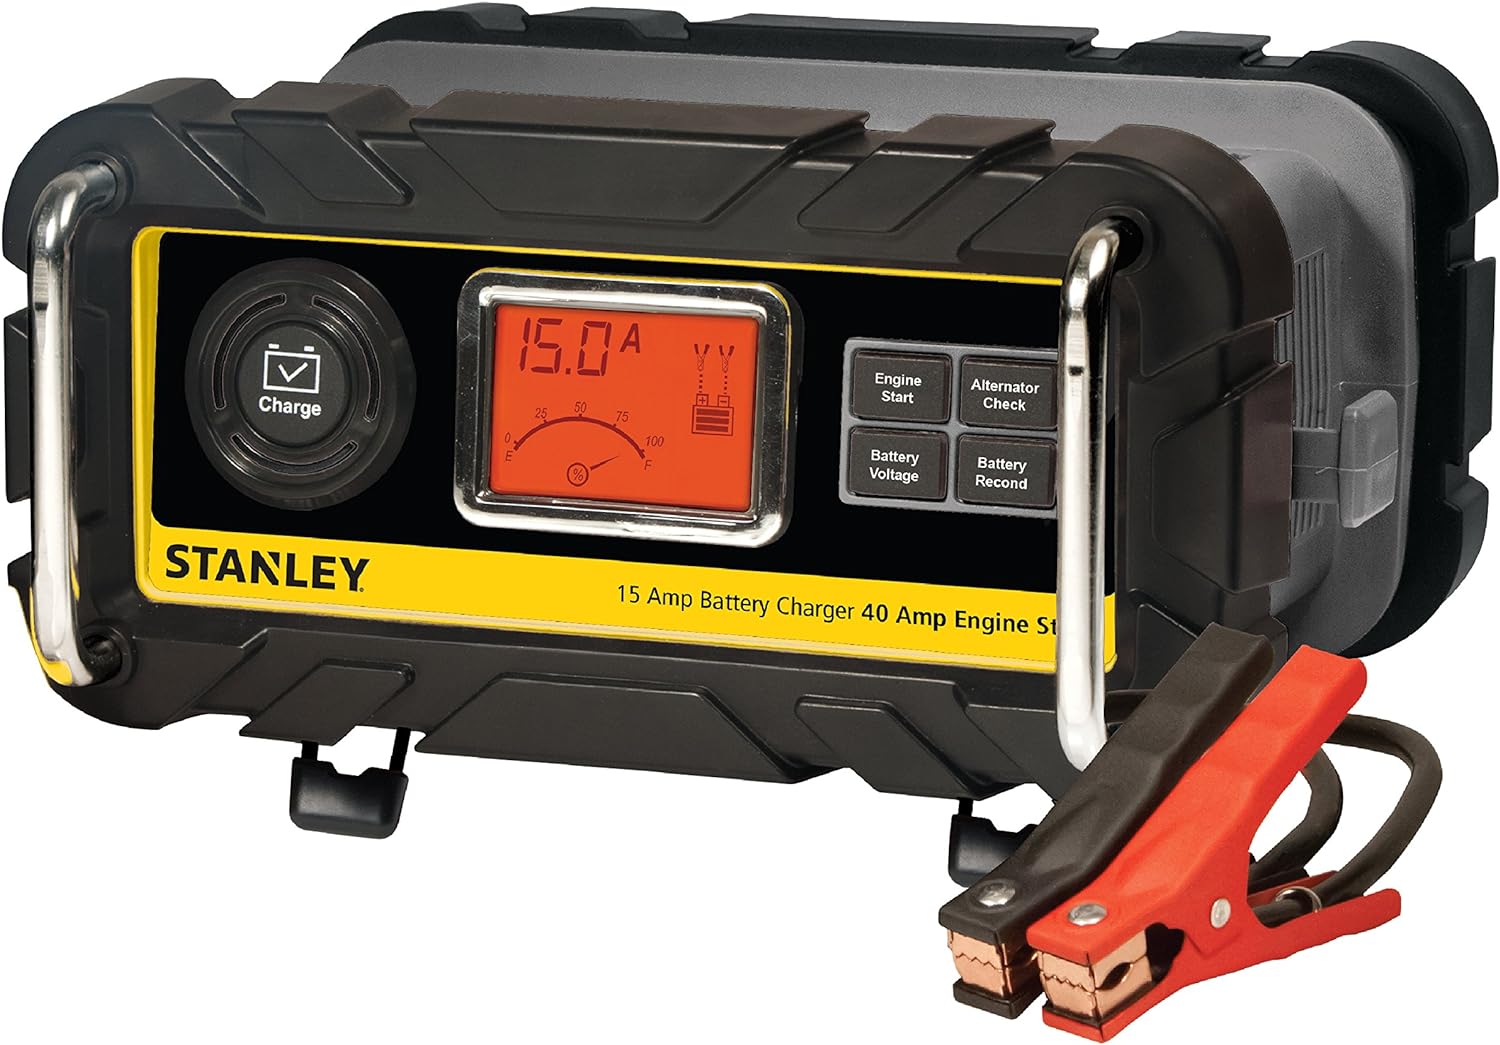 STANLEY BC25BS Smart 12V Battery Charger for Car/Marine Charging - STANLEY BC25BS Smart 12V Battery Charger Review